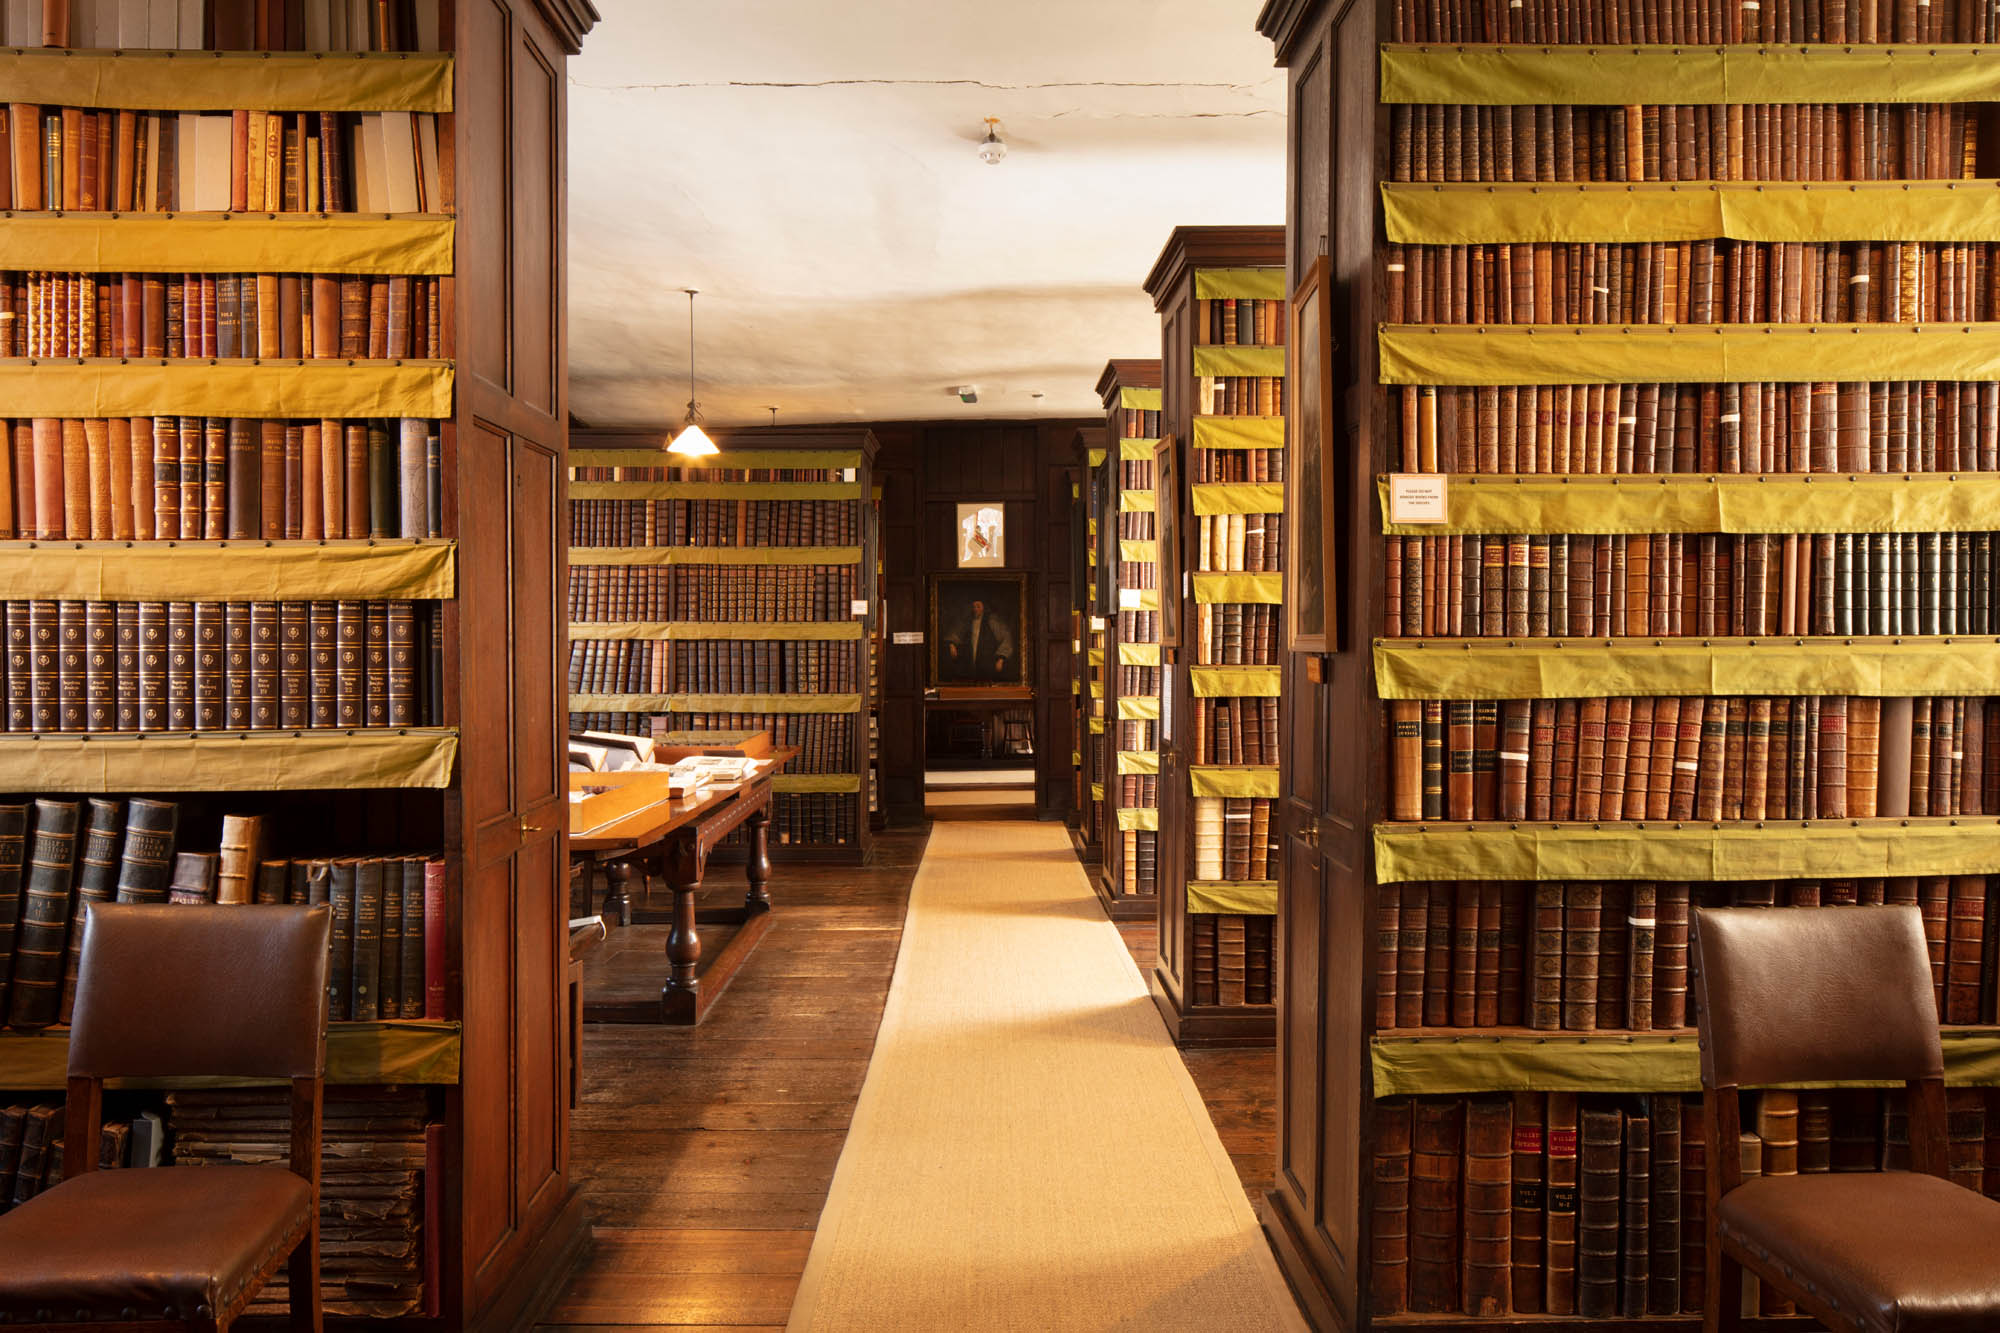 rows of dark wood historic bookcases line the Plume Library, filled with classic leatherbound books against a wooden timbered flooring lightened by a pale cream carpet runner.